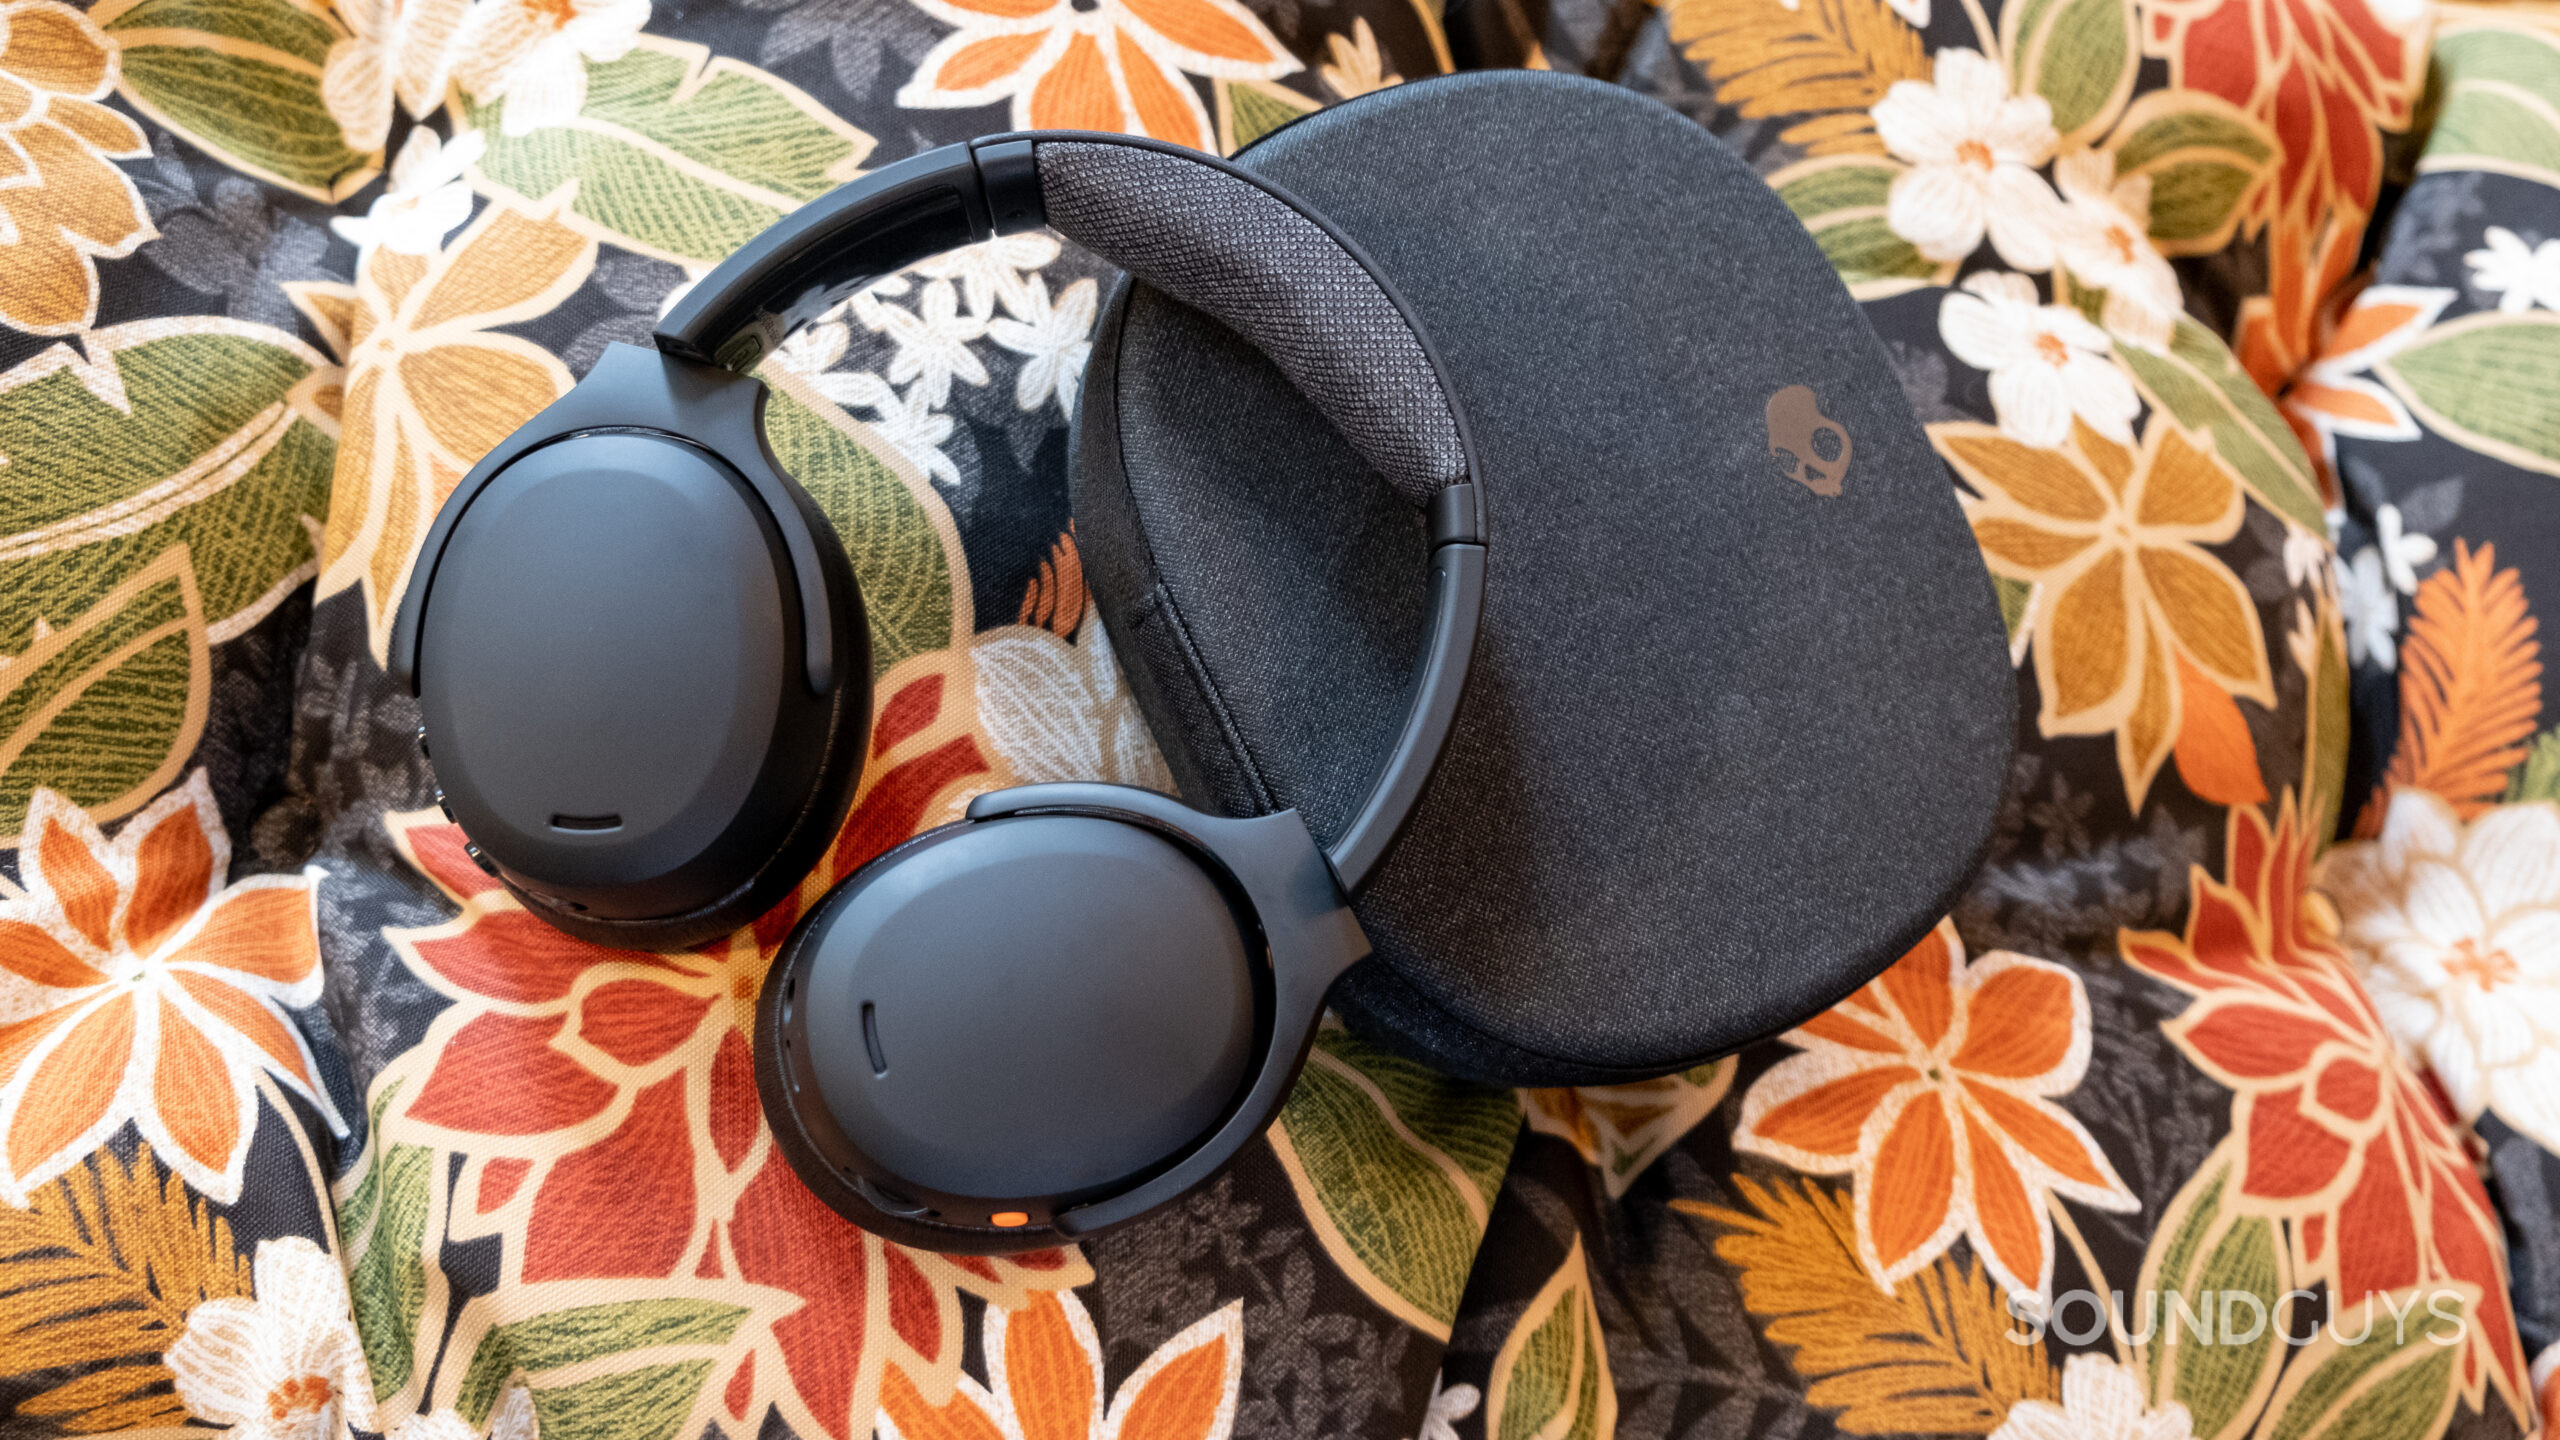 The Skullcandy Crusher ANC 2 rests on its case on a floral background.